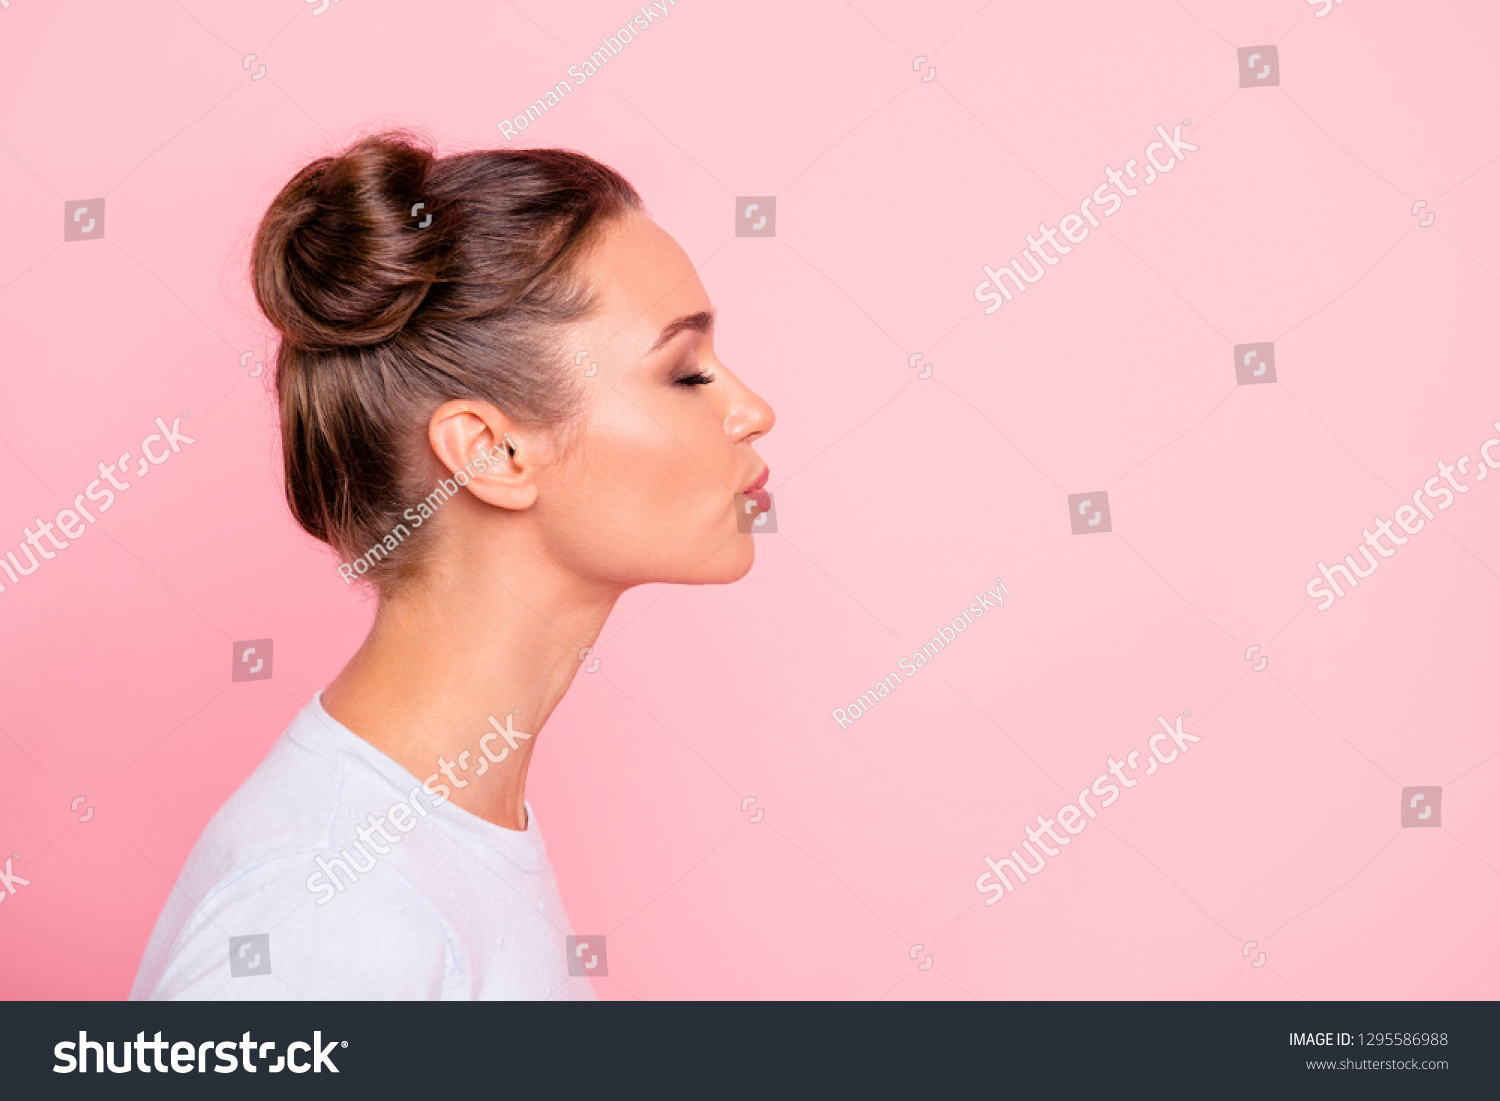 Profile side view portrait of her she nice cute attractive lovely sweet cheerful girl lady kissing you isolated over pastel pink background #1295586988